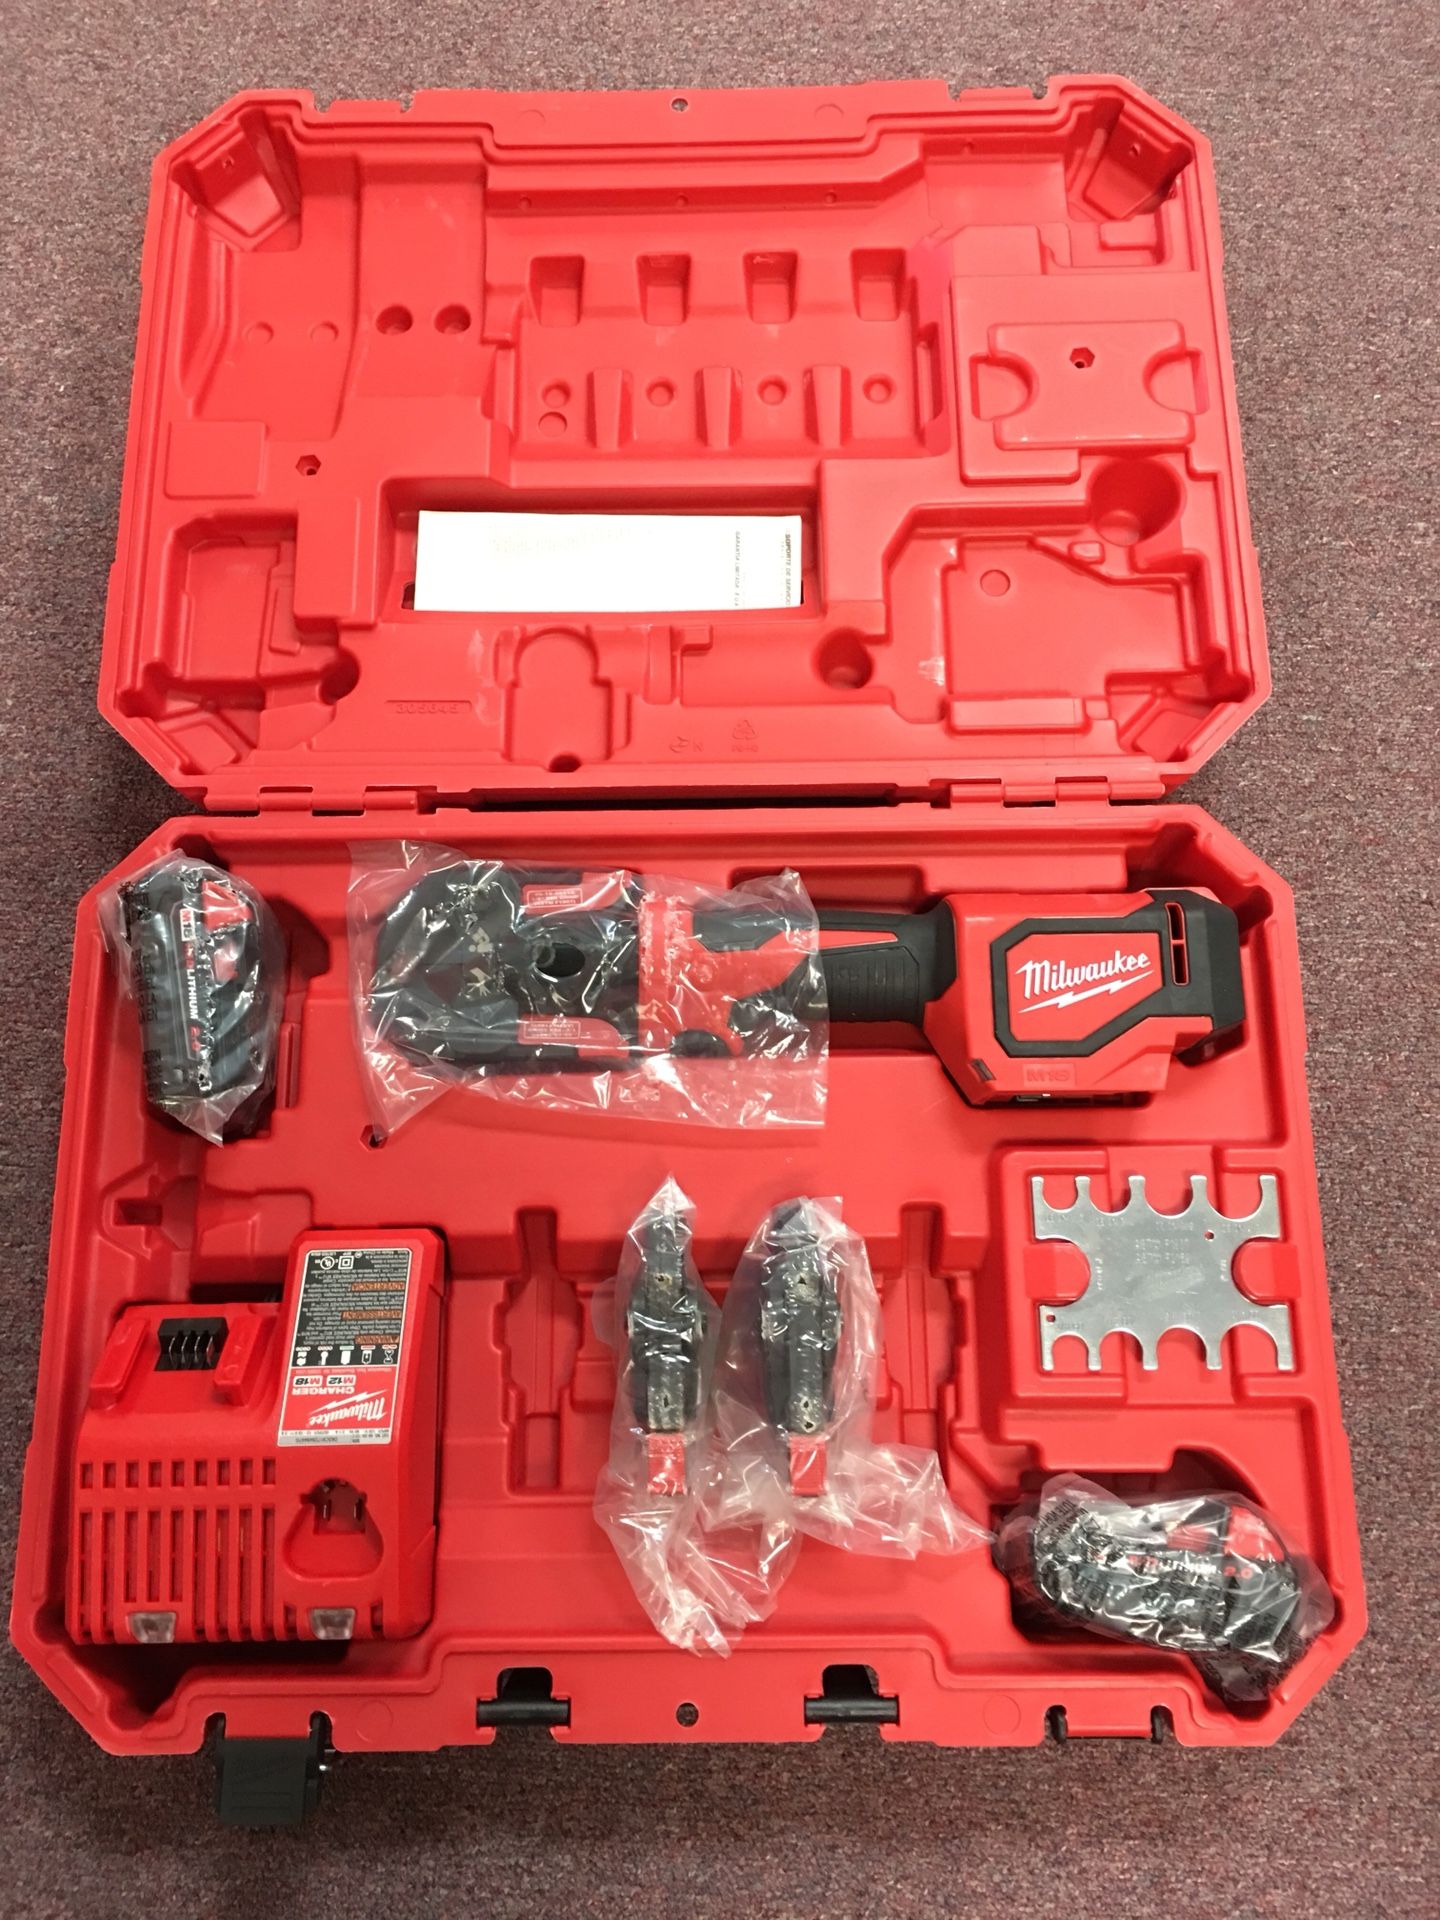 New Milwaukee M18 Short Throw Press Tool Kit w/Pex Crimp Jaws for Sale in  Waltham, MA OfferUp